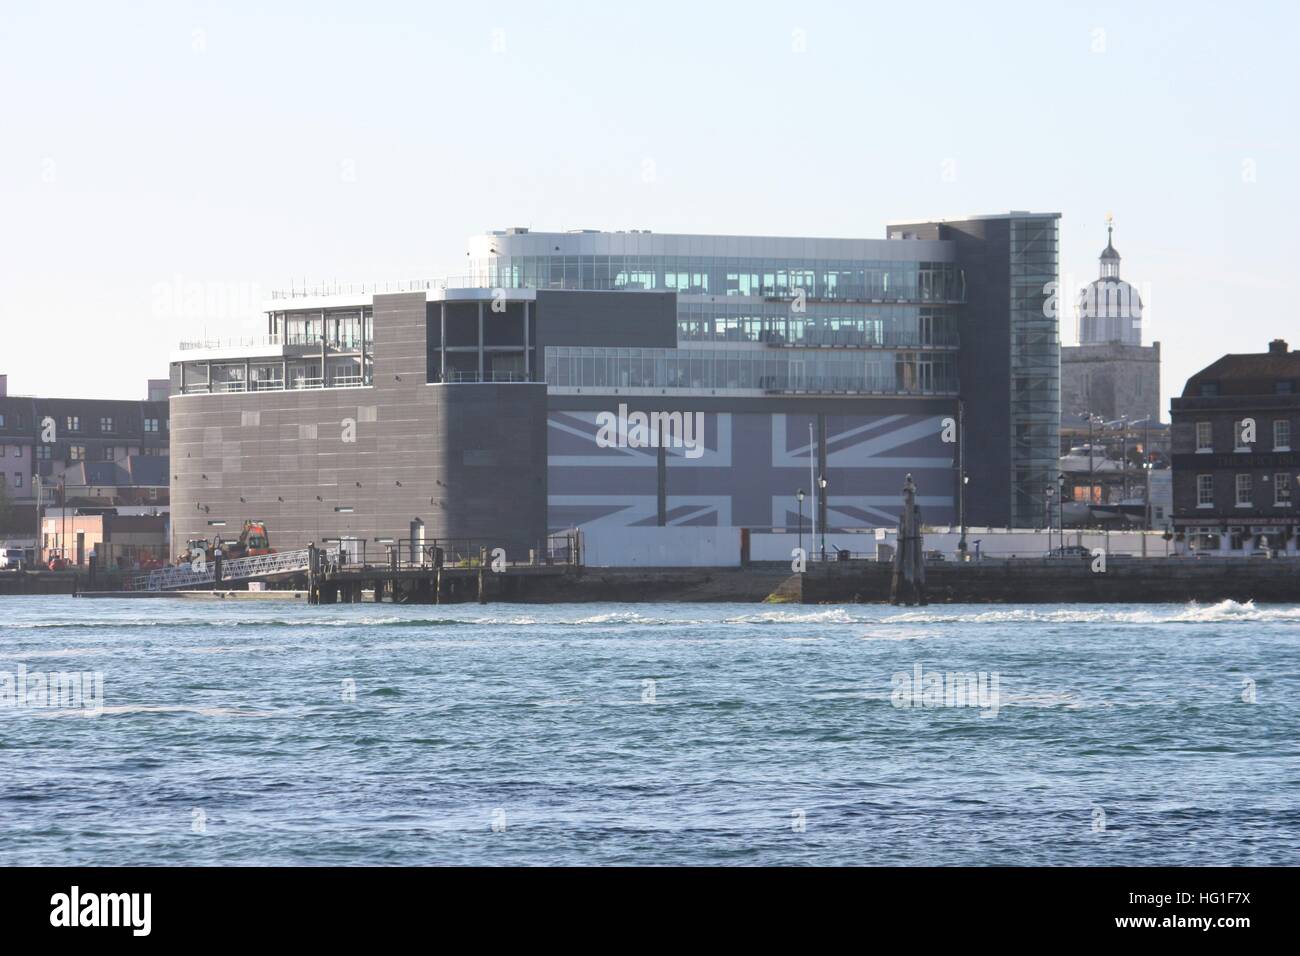 Ben Ainslie Racing Headquarters in portsmouth harbour Stock Photo